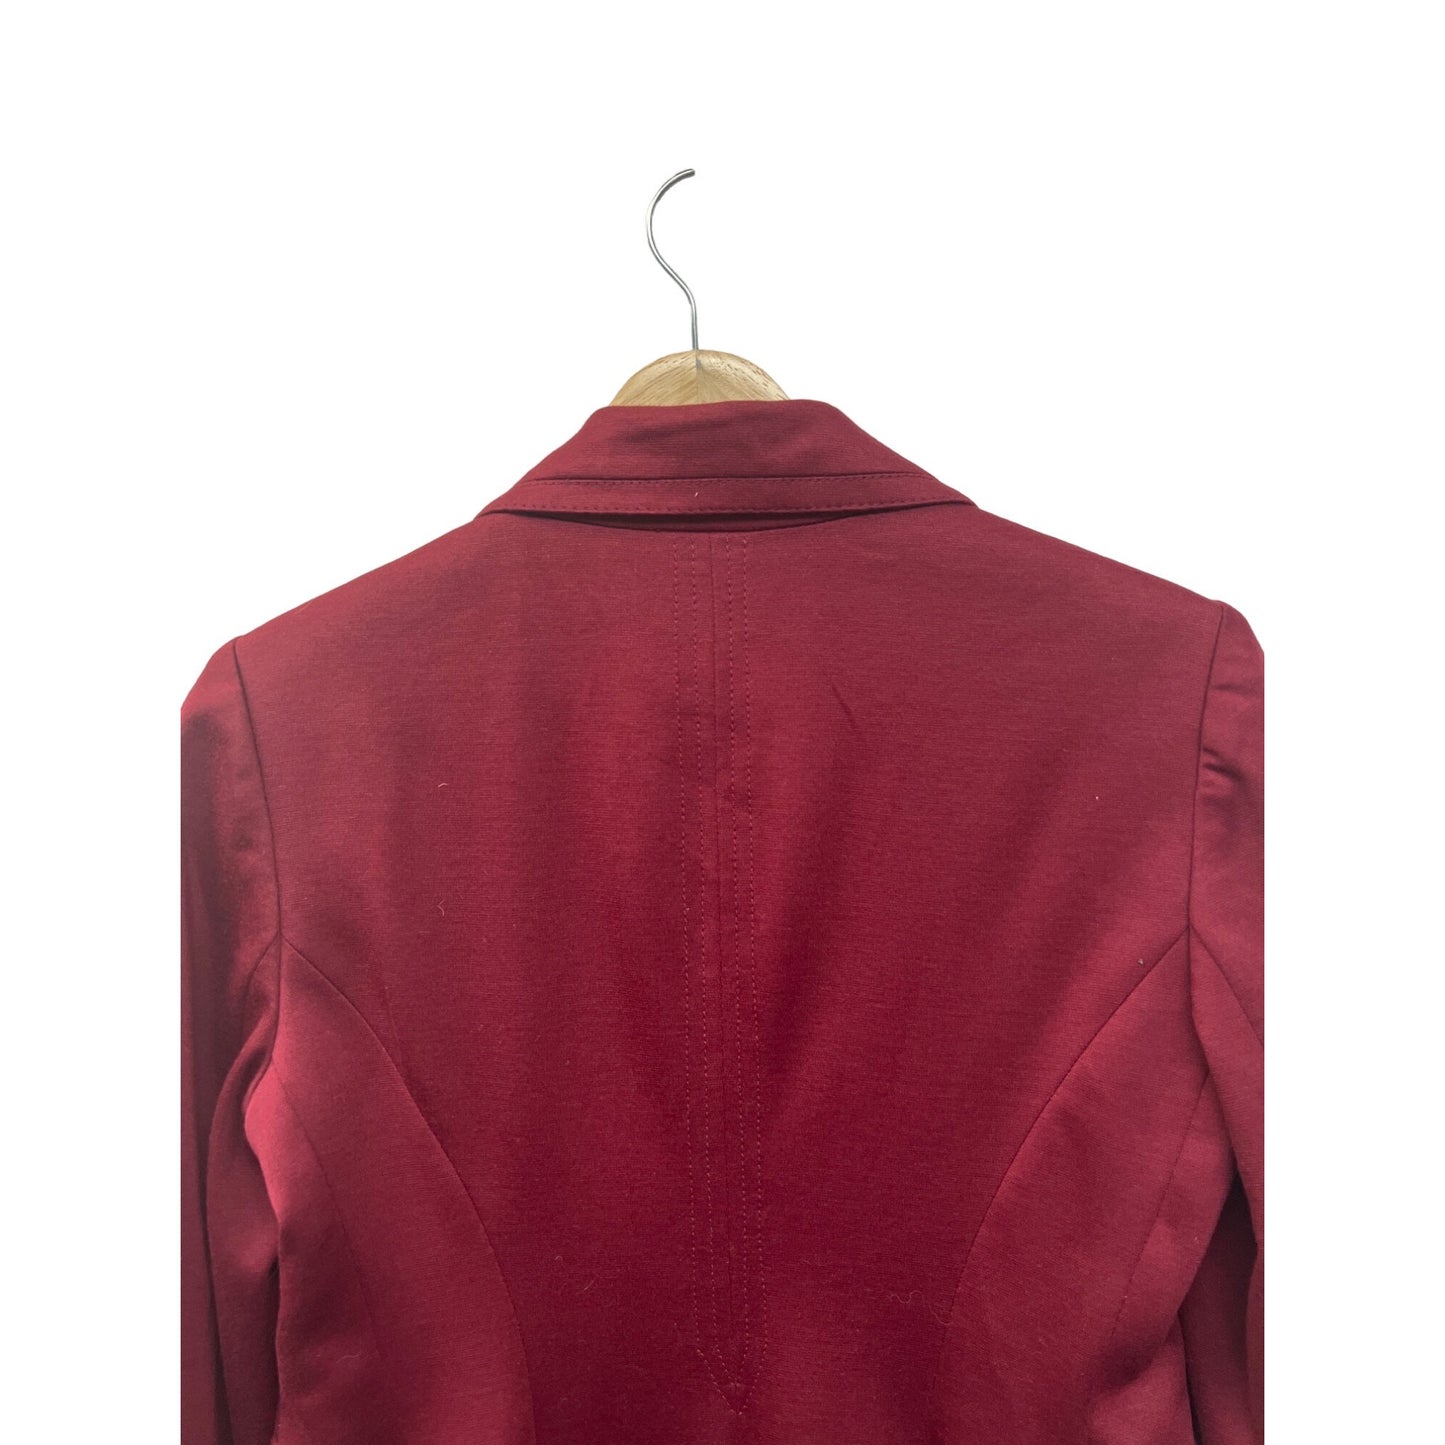 The Limited OBR Wine Red Single Button Blazer with Polka Dot Lining